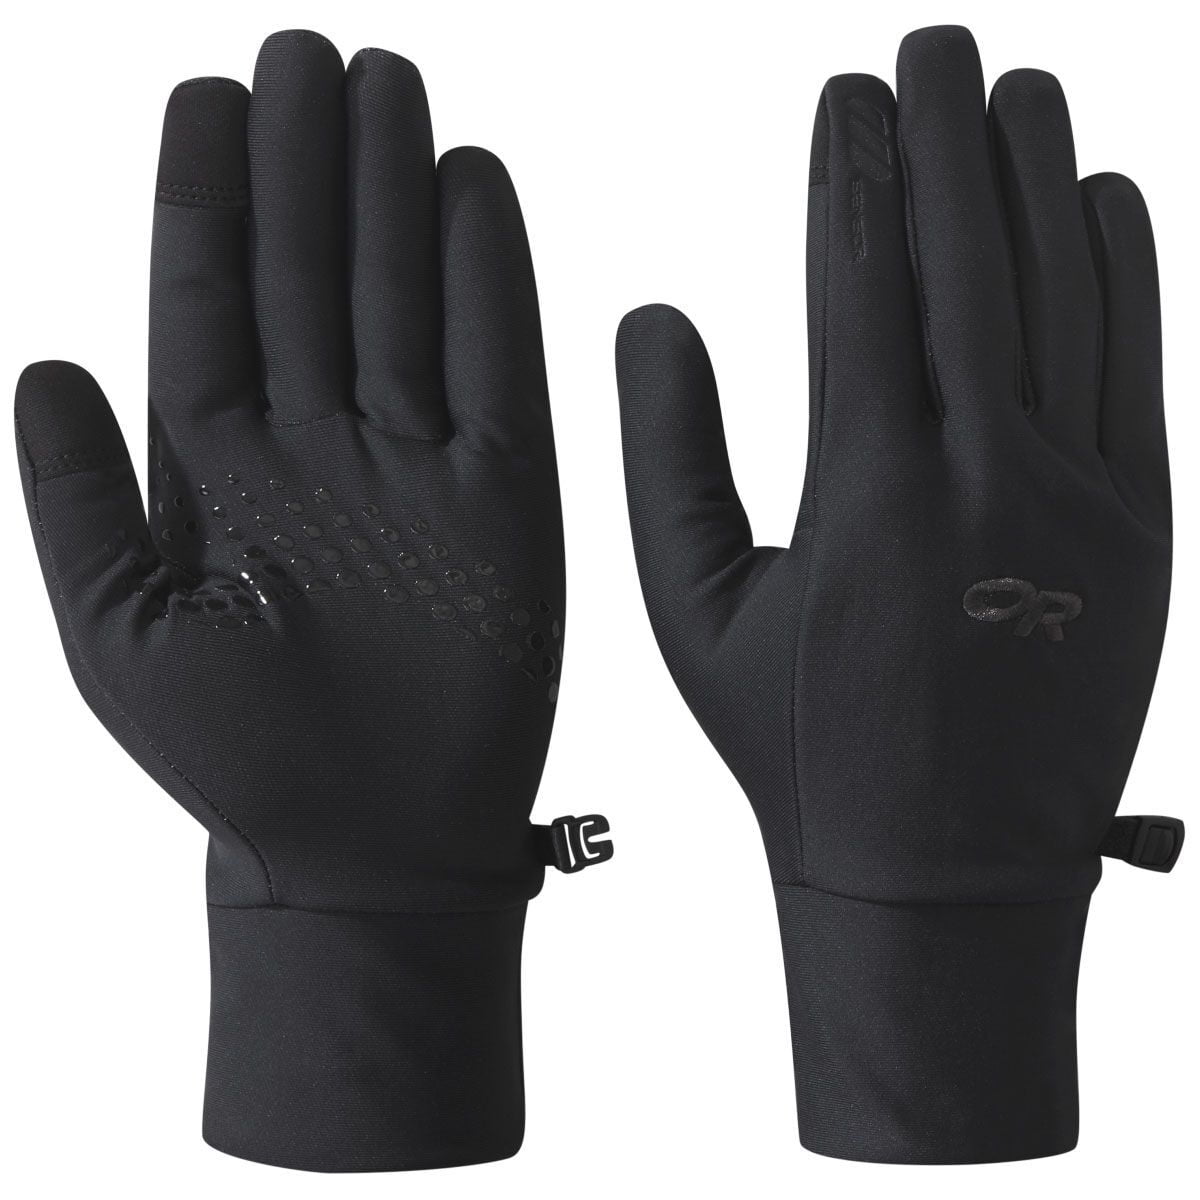 the men's vigor lightweight sensor glove in black as a pair showing the front and back